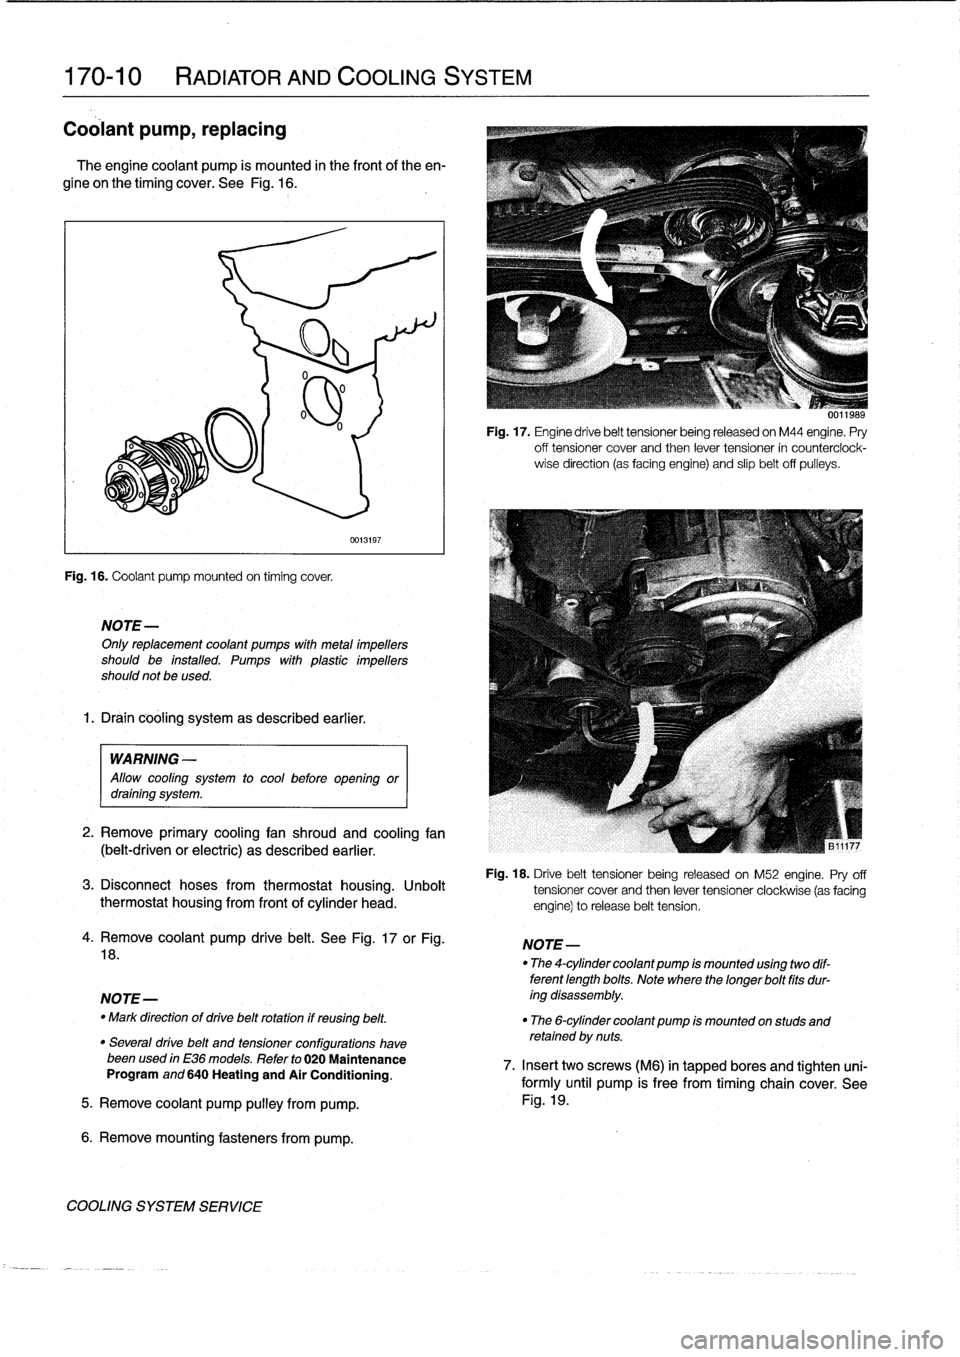 BMW 325i 1994 E36 Workshop Manual 
170-10

	

RADIATOR
AND
COOLING
SYSTEM

Coolant
pump,
replacing

The
engine
coolant
pump
is
mounted
in
the
frontof
the
en-

gine
on
the
timing
cover
.
See
Fig
.
16
.

Fig
.
16
.
Coolant
pump
mounted
